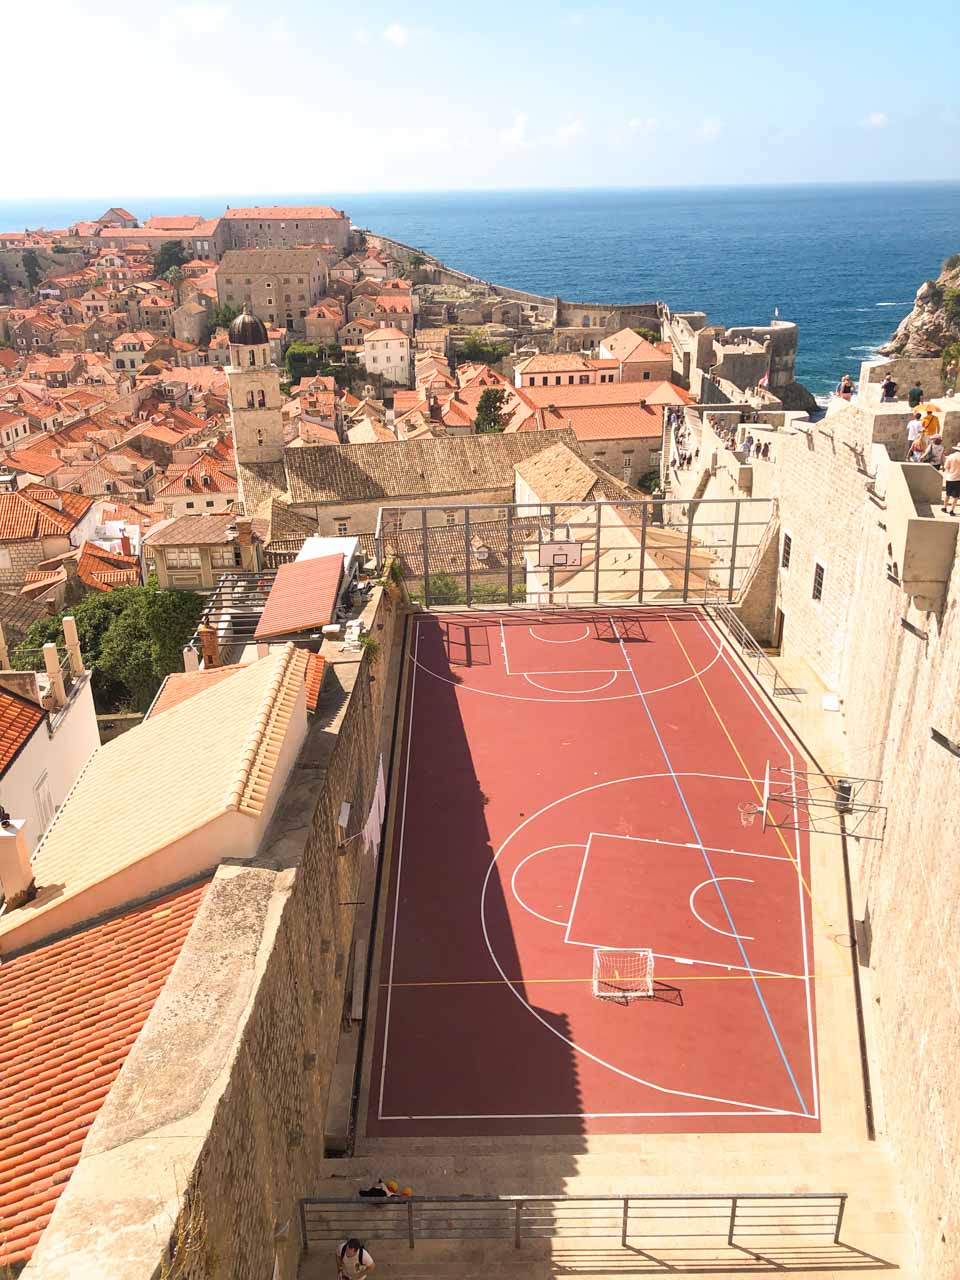 Basketball court seen from the top of the Dubrovnik City Walls